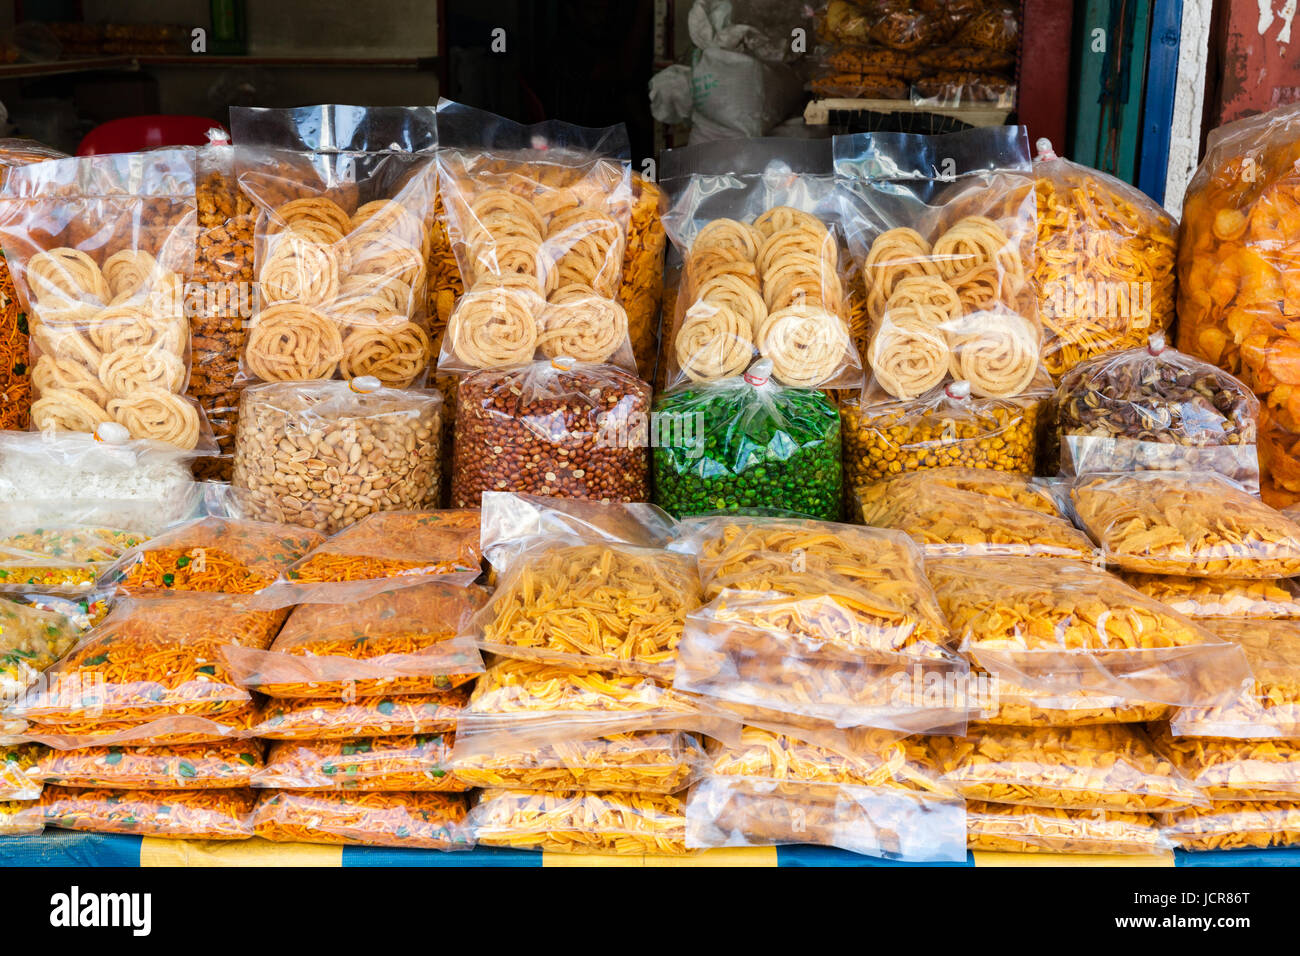 Typical Indian store in George Town, Penang, Malaysia. Stock Photo